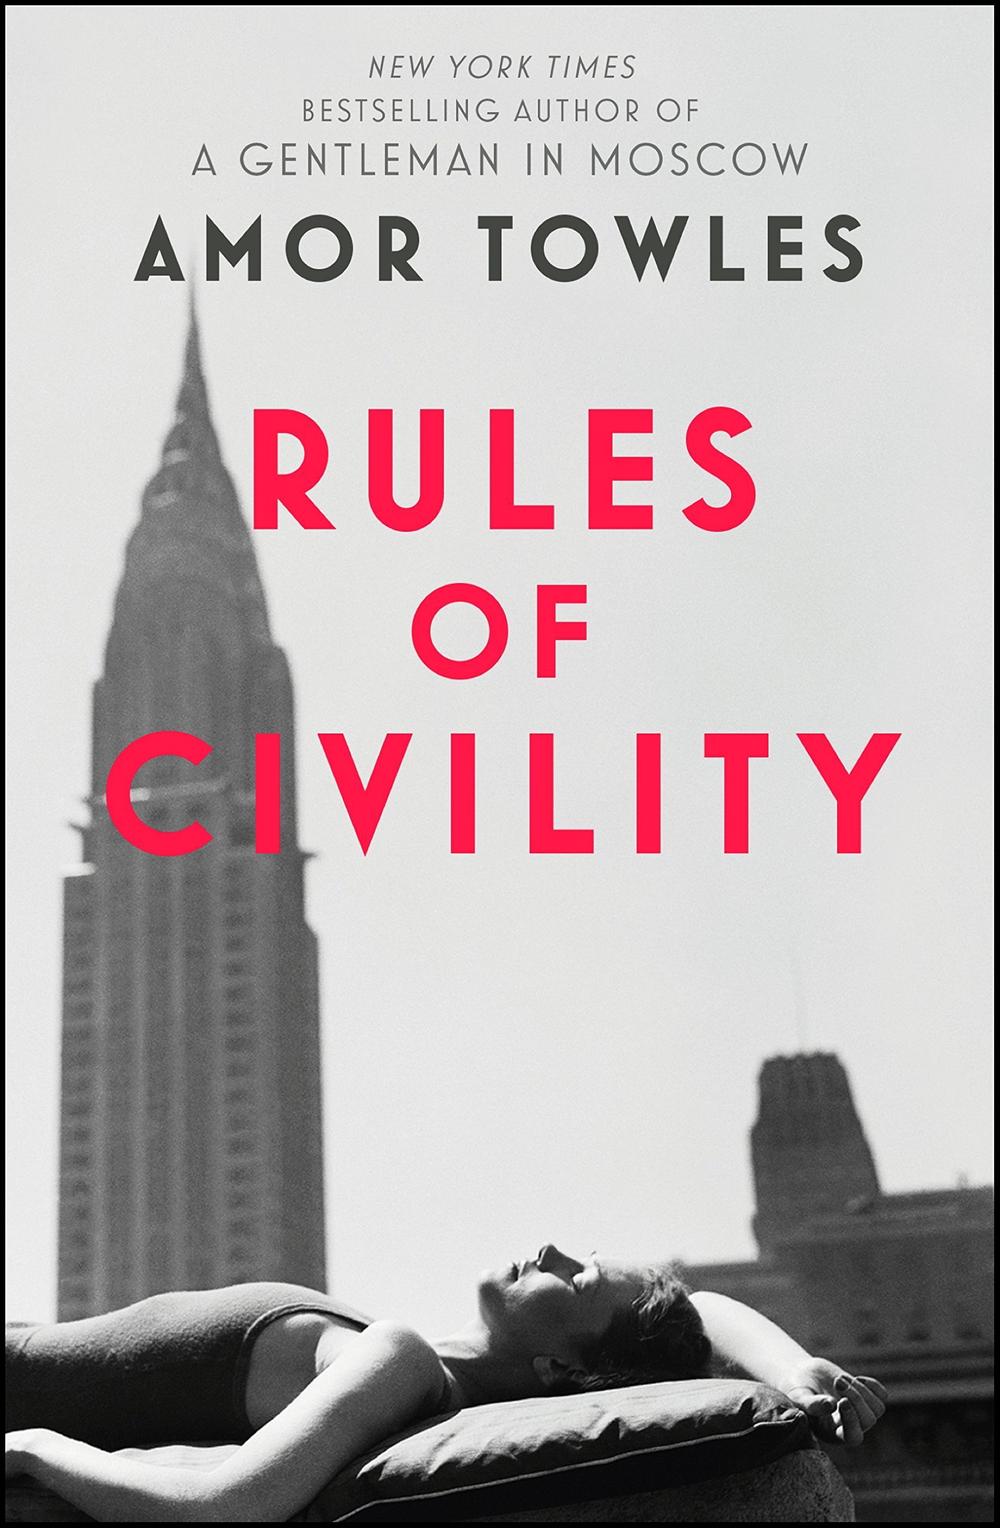 rules of civility by amor towles summary